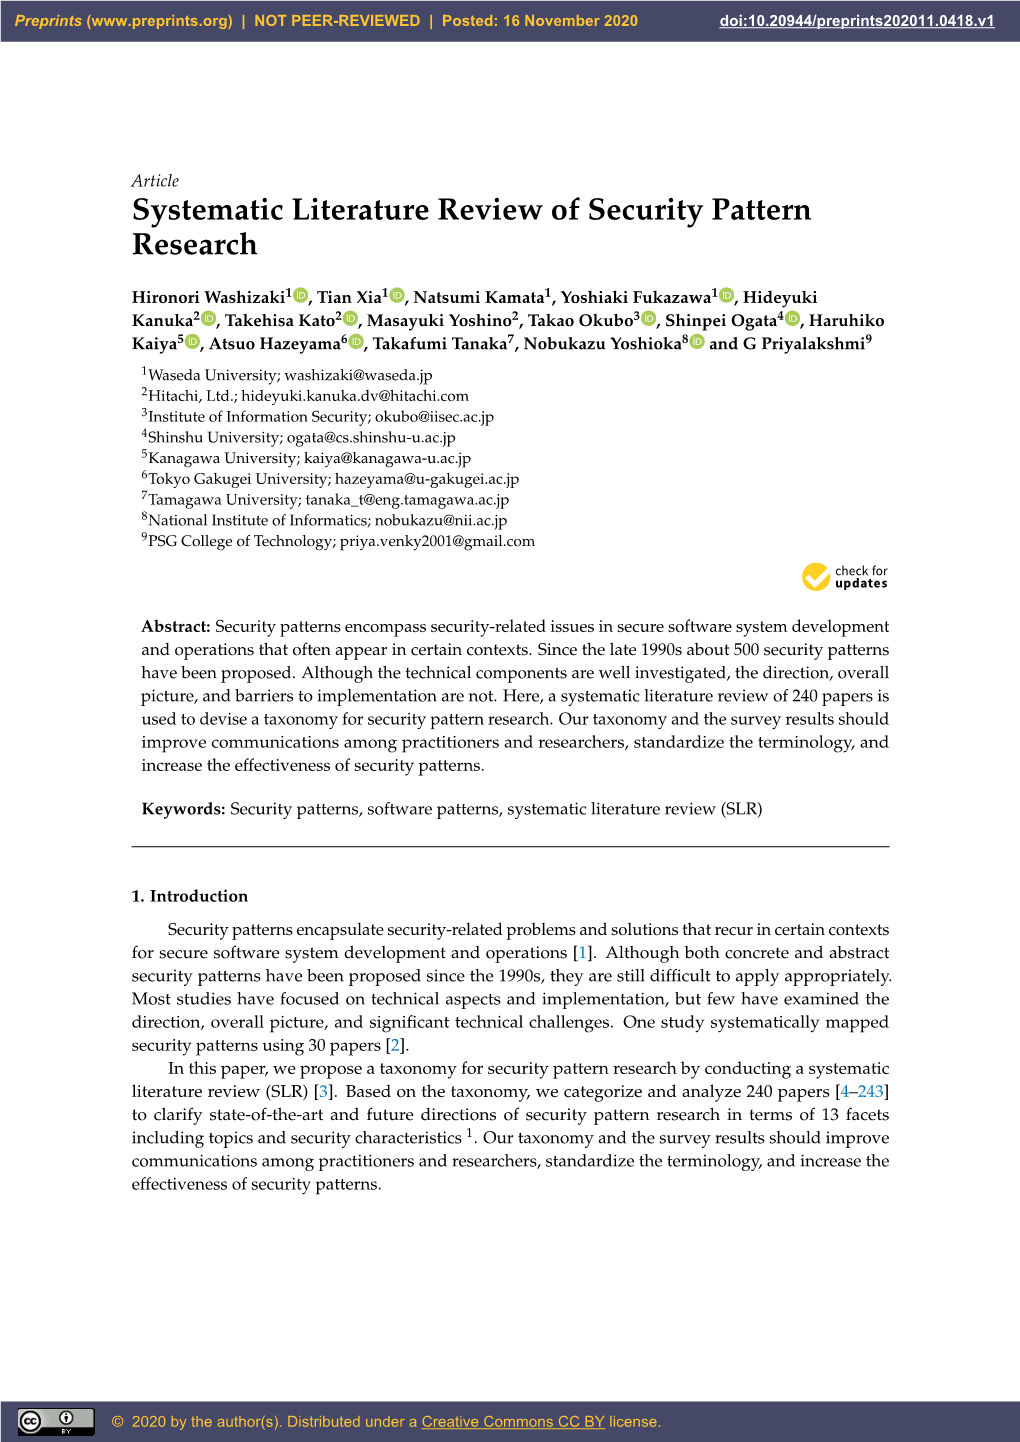 Systematic Literature Review of Security Pattern Research